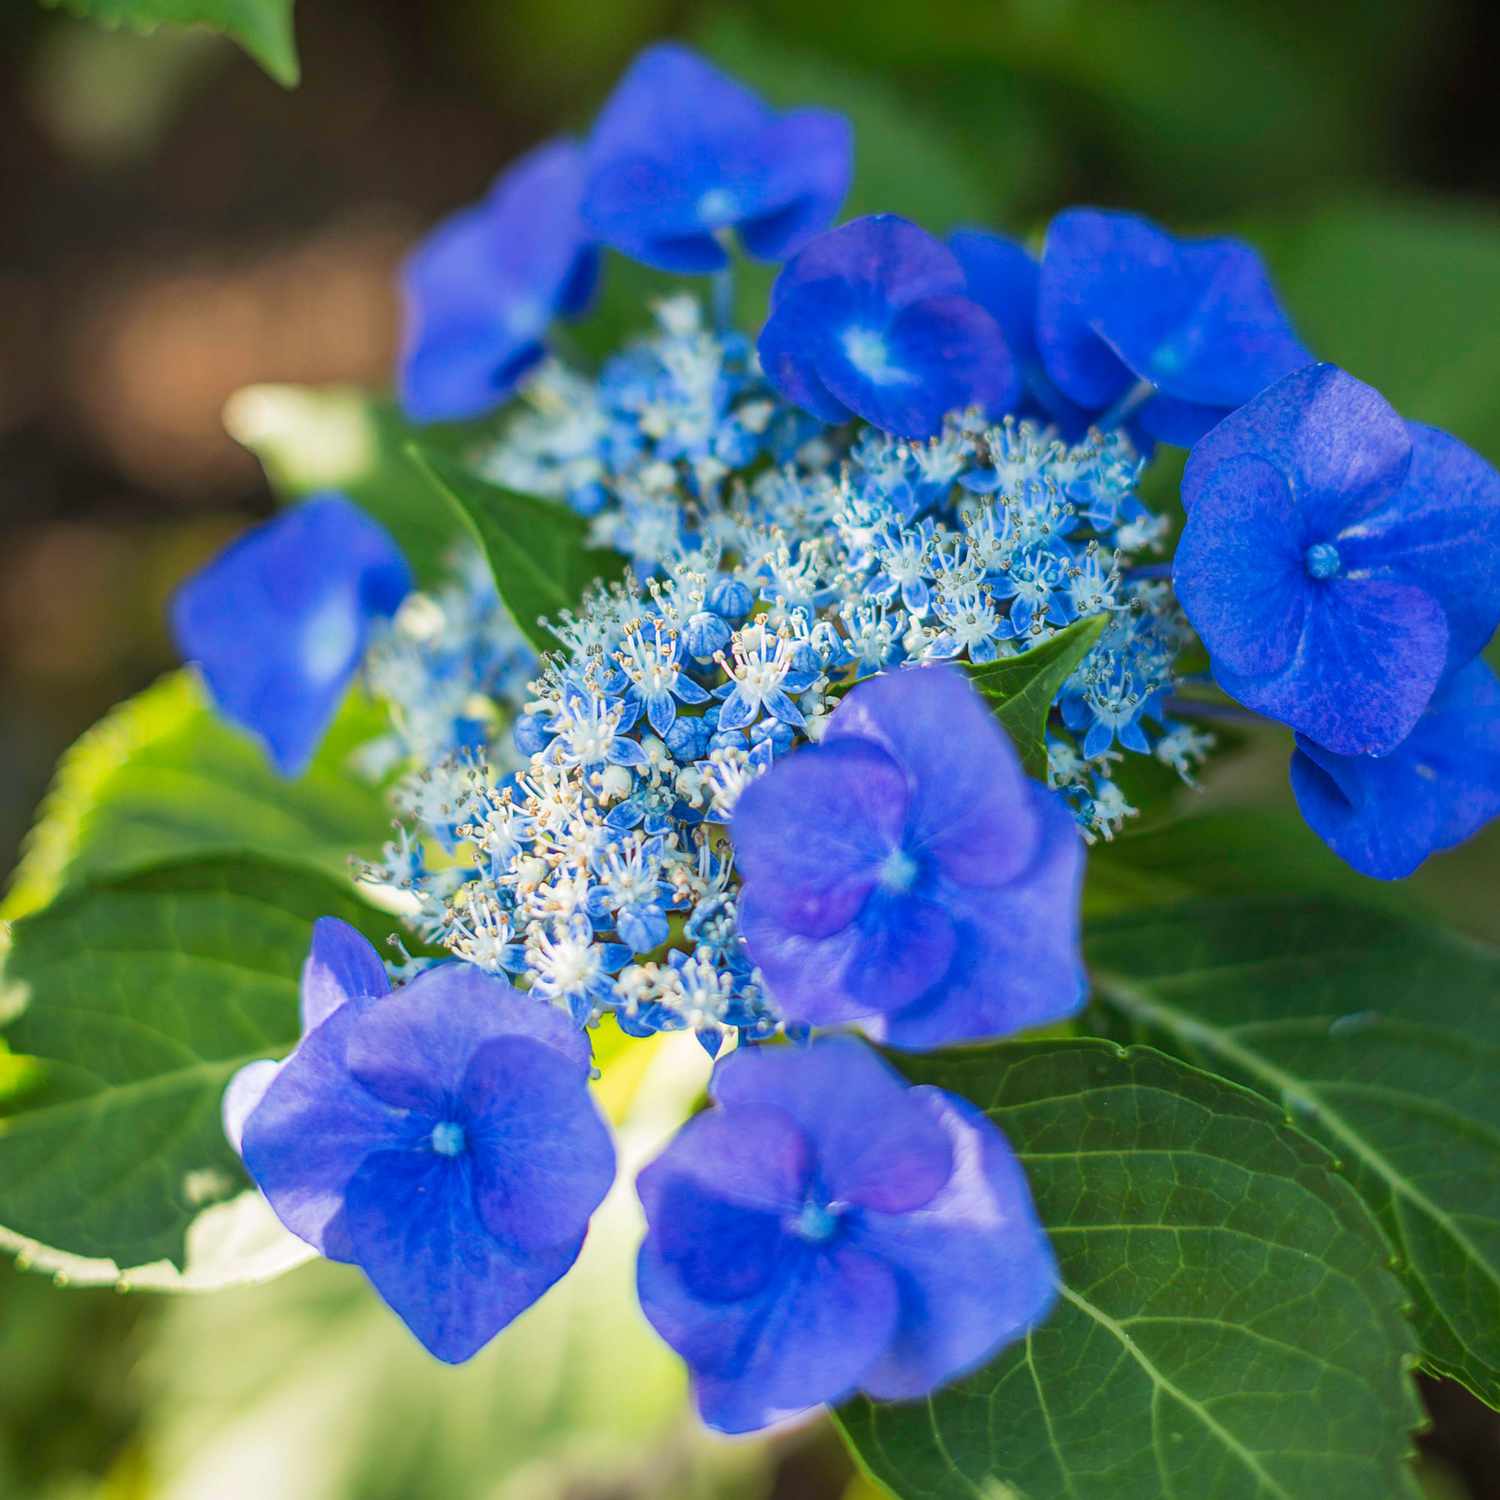 Image of Blue Cassel Hydrangea in a garden setting, with other flowers and plants